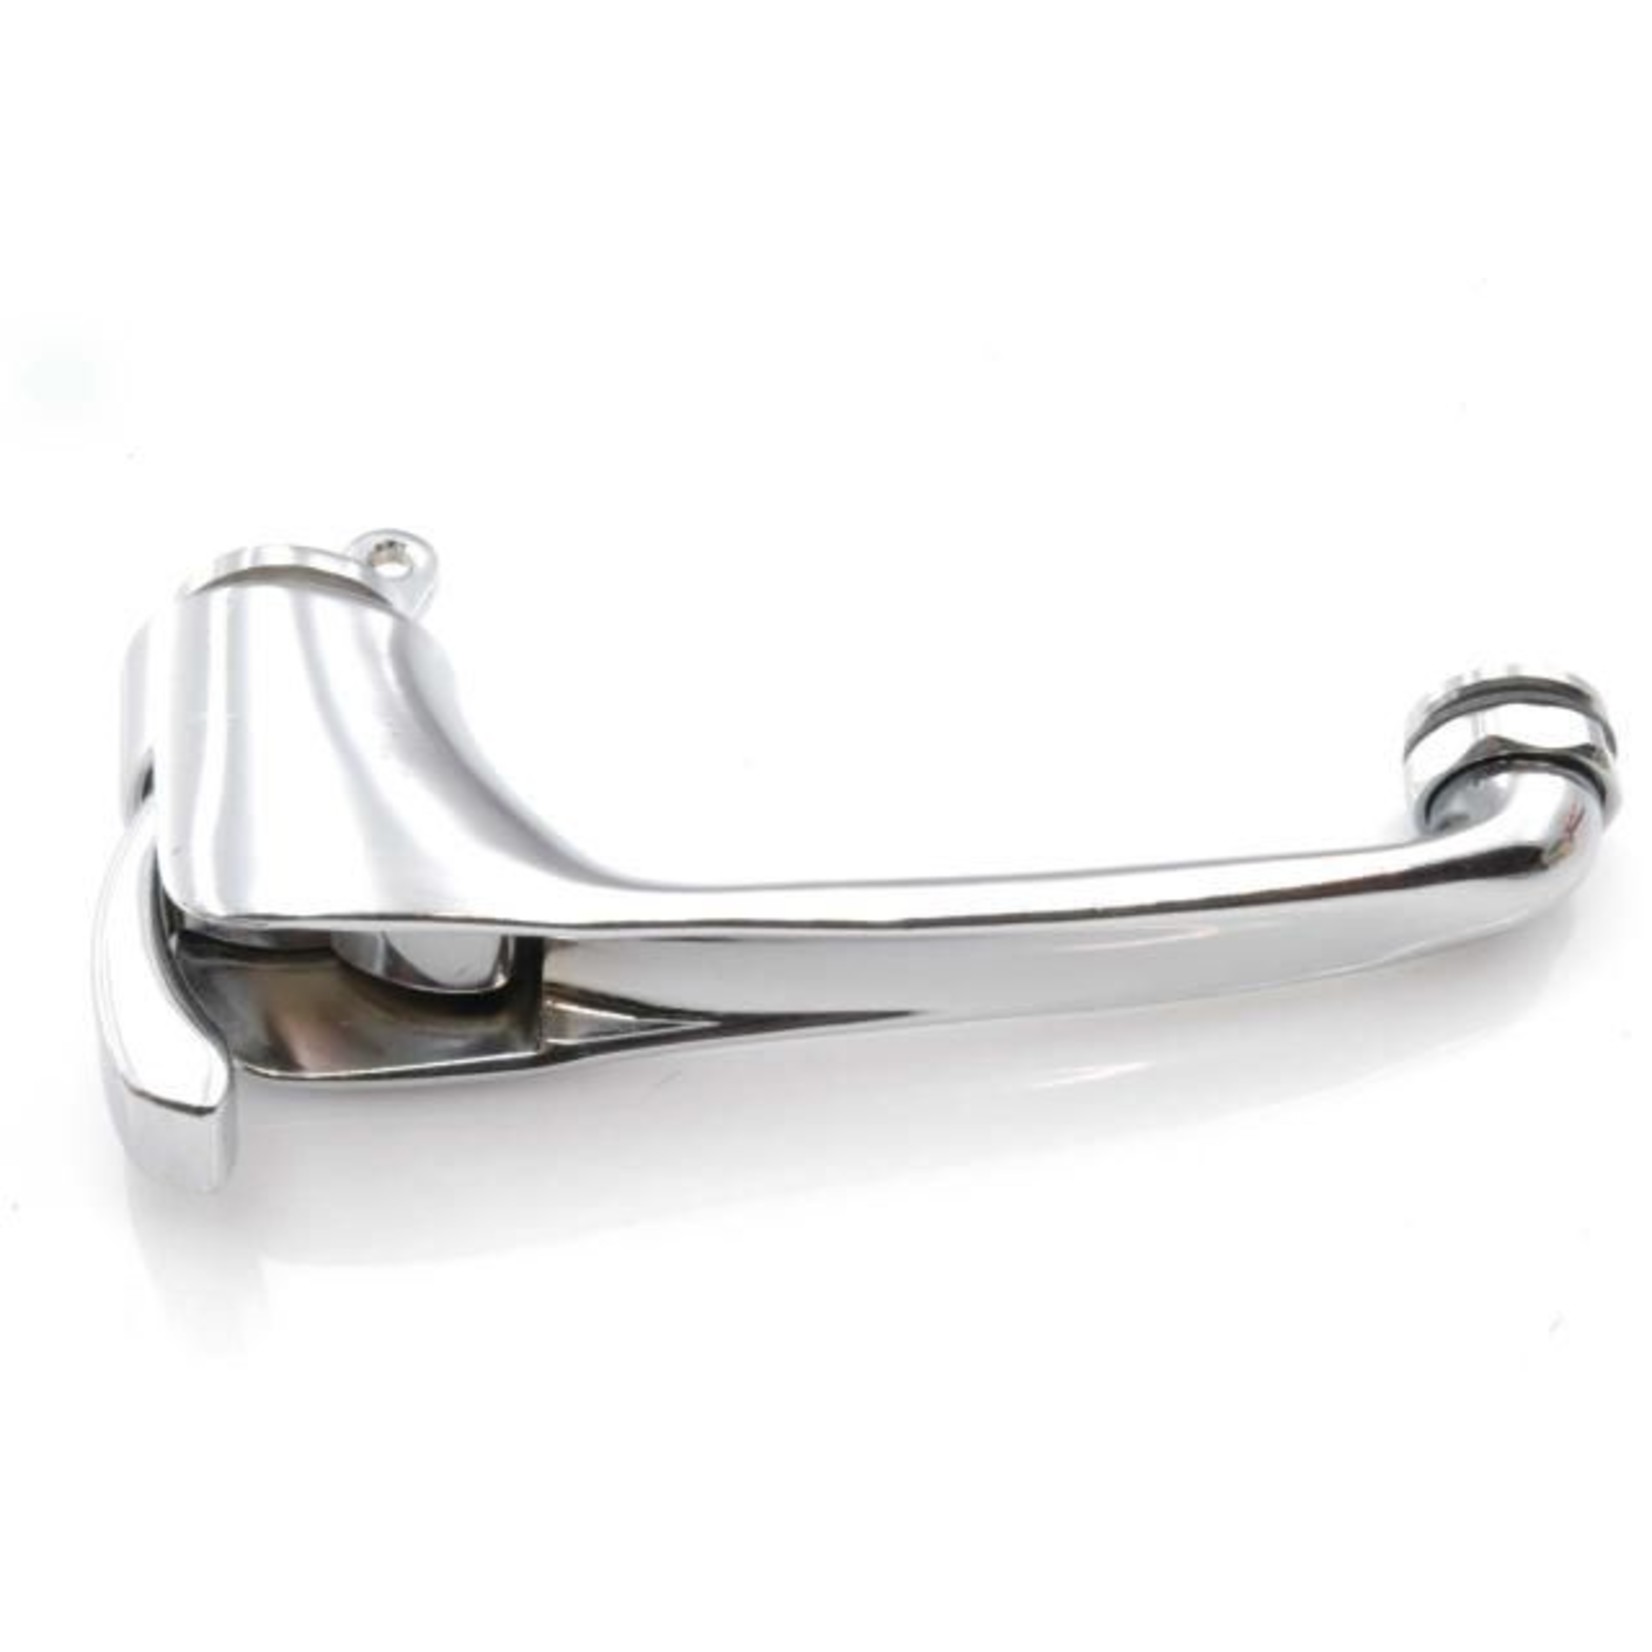 Int handle chrome right tong 90mm Nr Org: 5427410